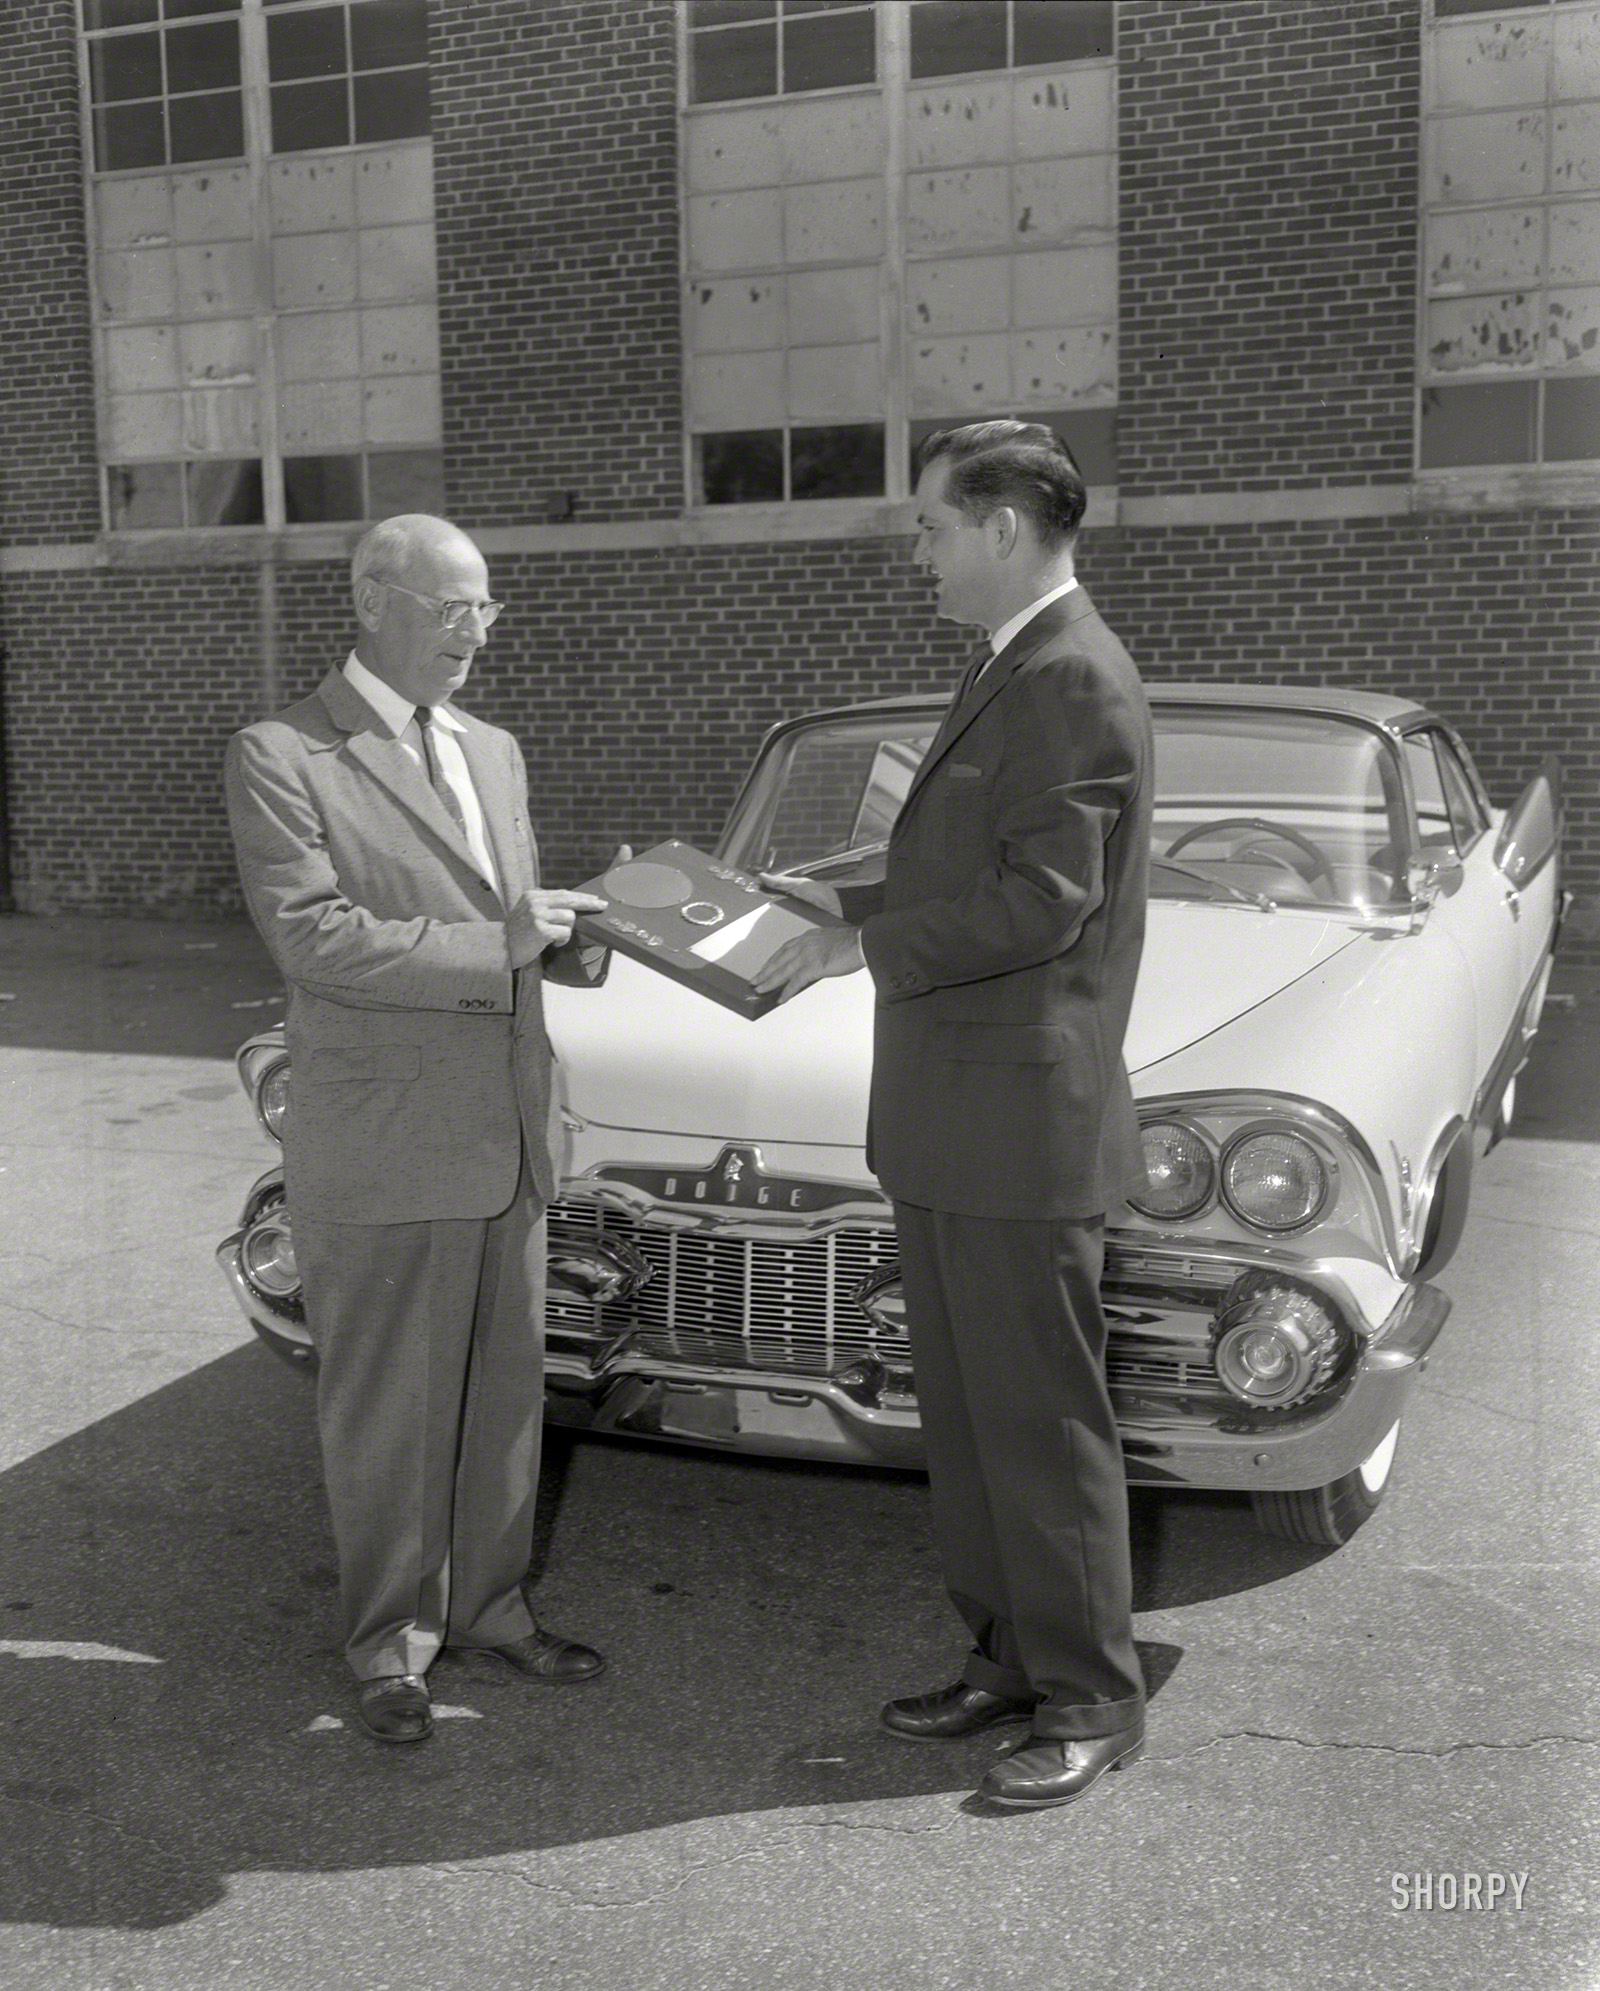 Columbus, Georgia, 1958. "Salesmen and 1959 Dodge." 4x5 acetate negative from the News Photo Archive. View full size.